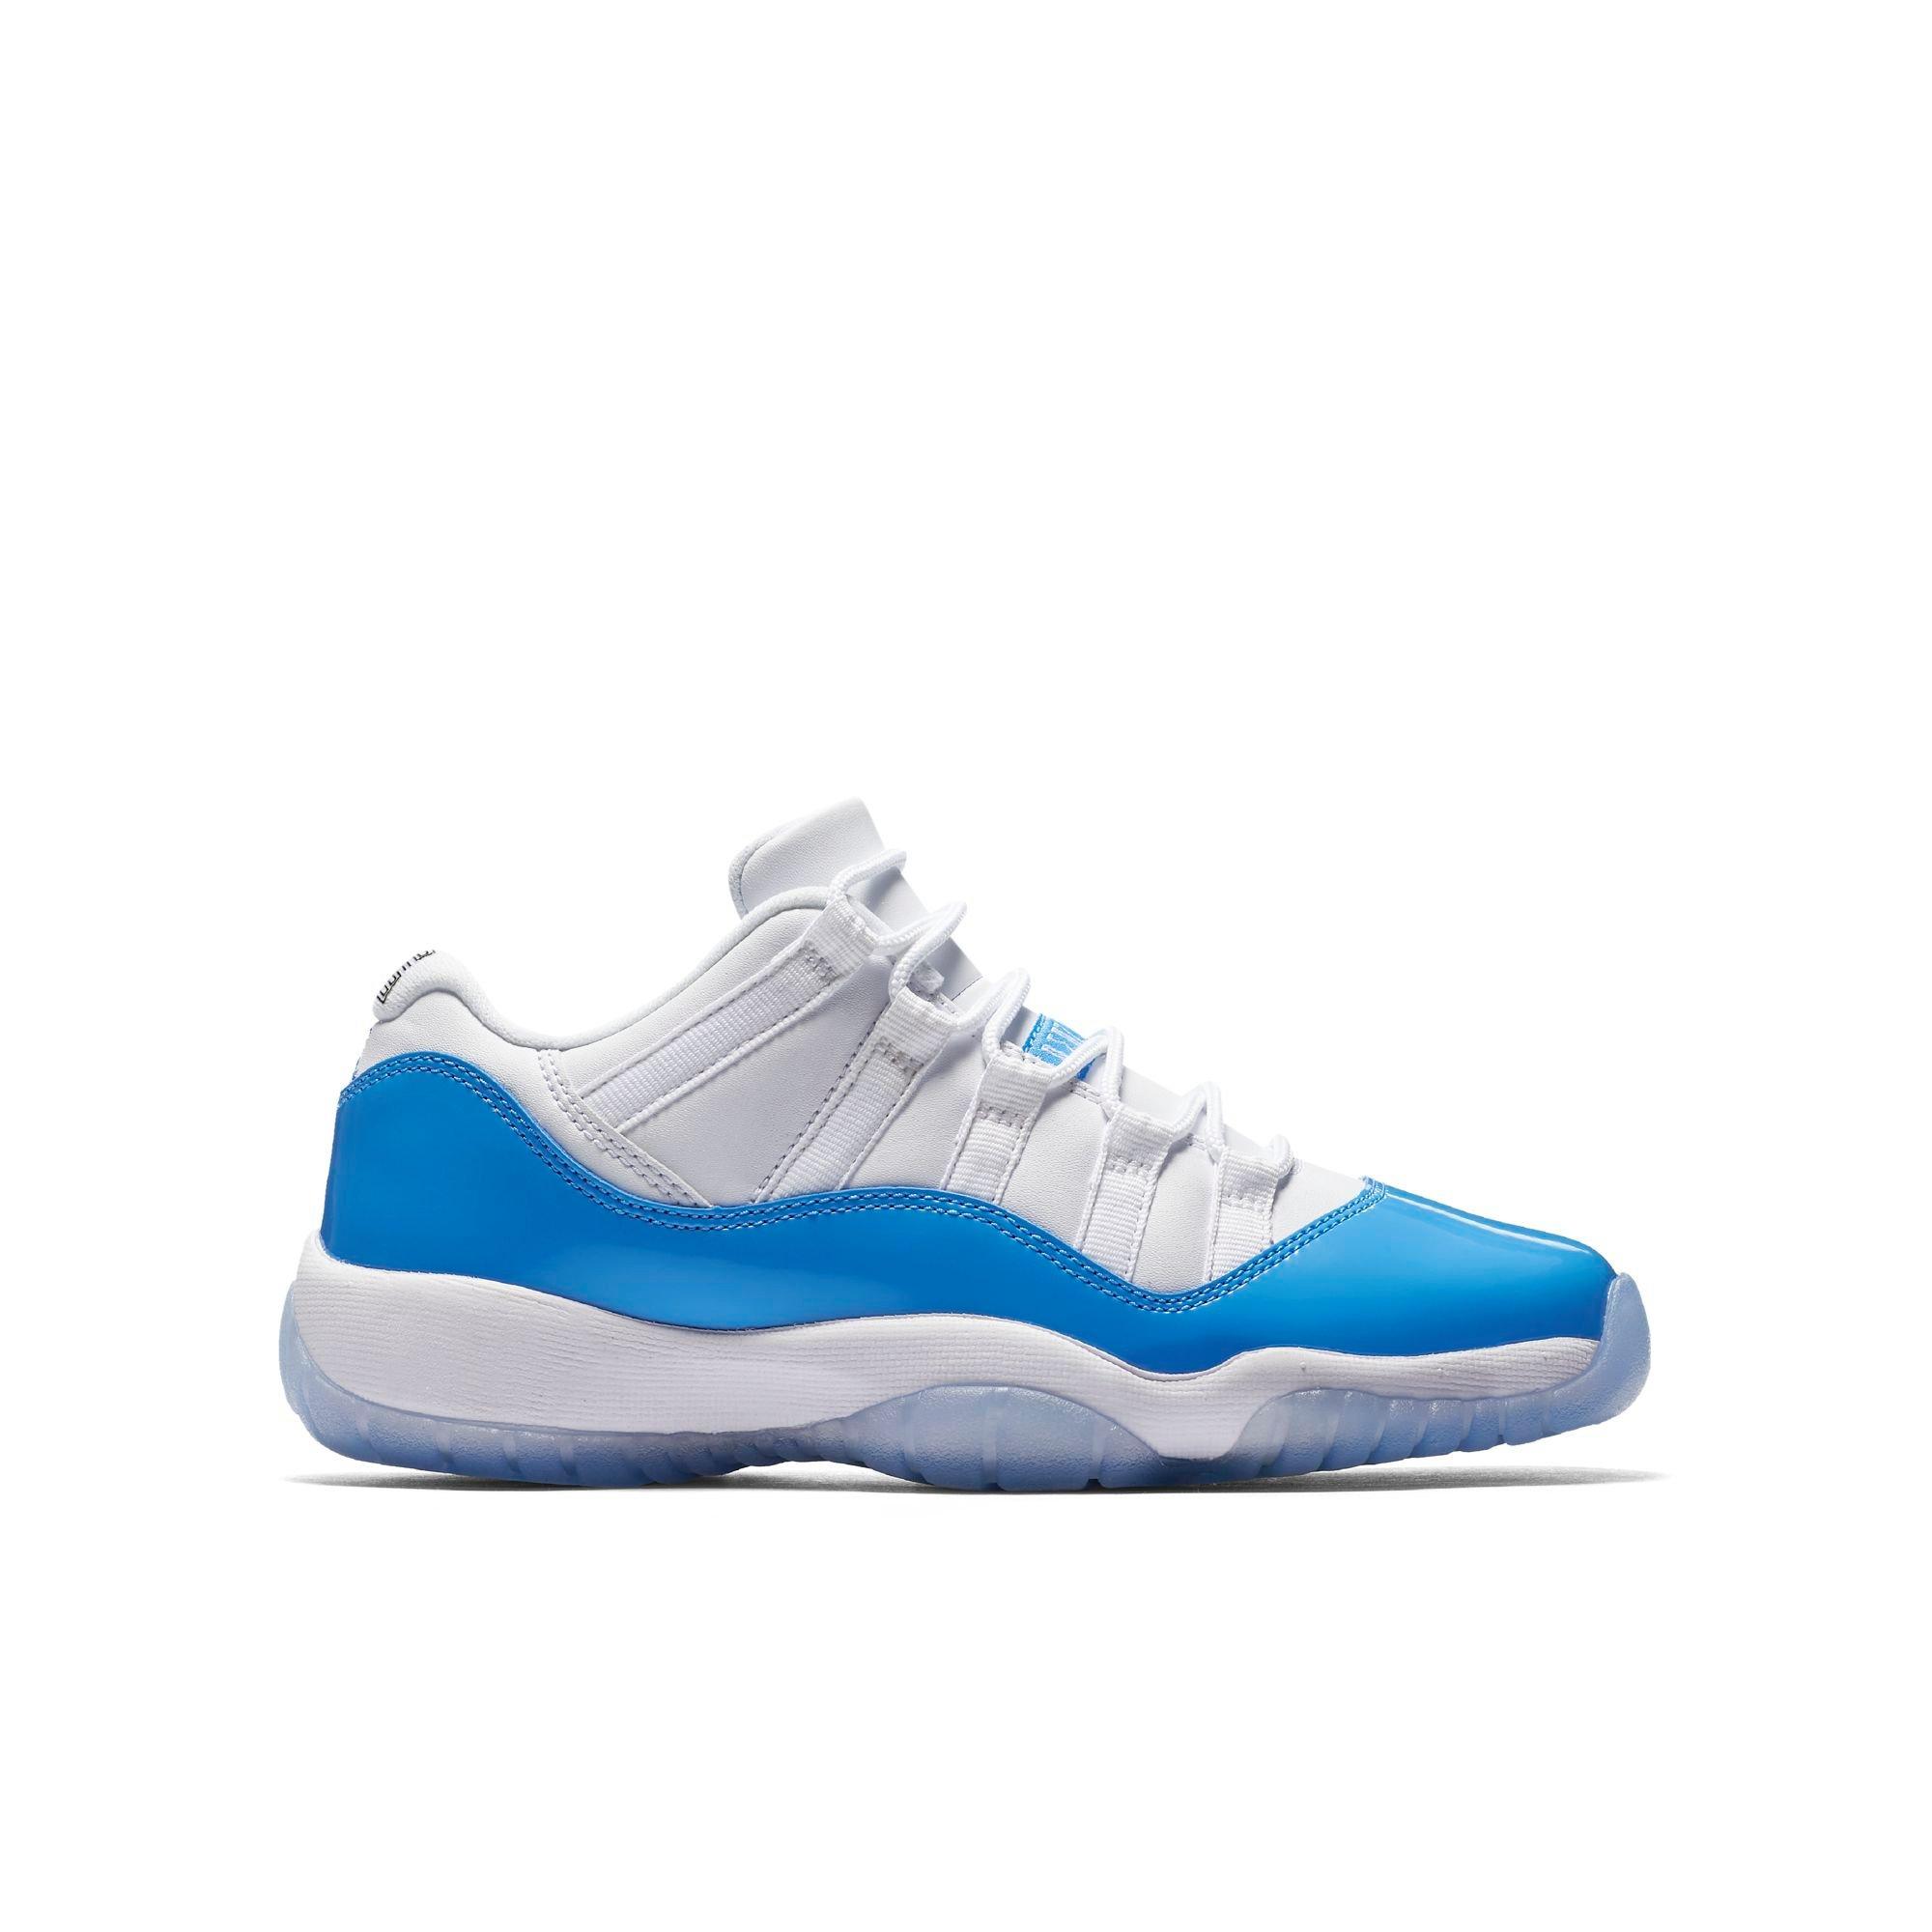 white and baby blue 11s